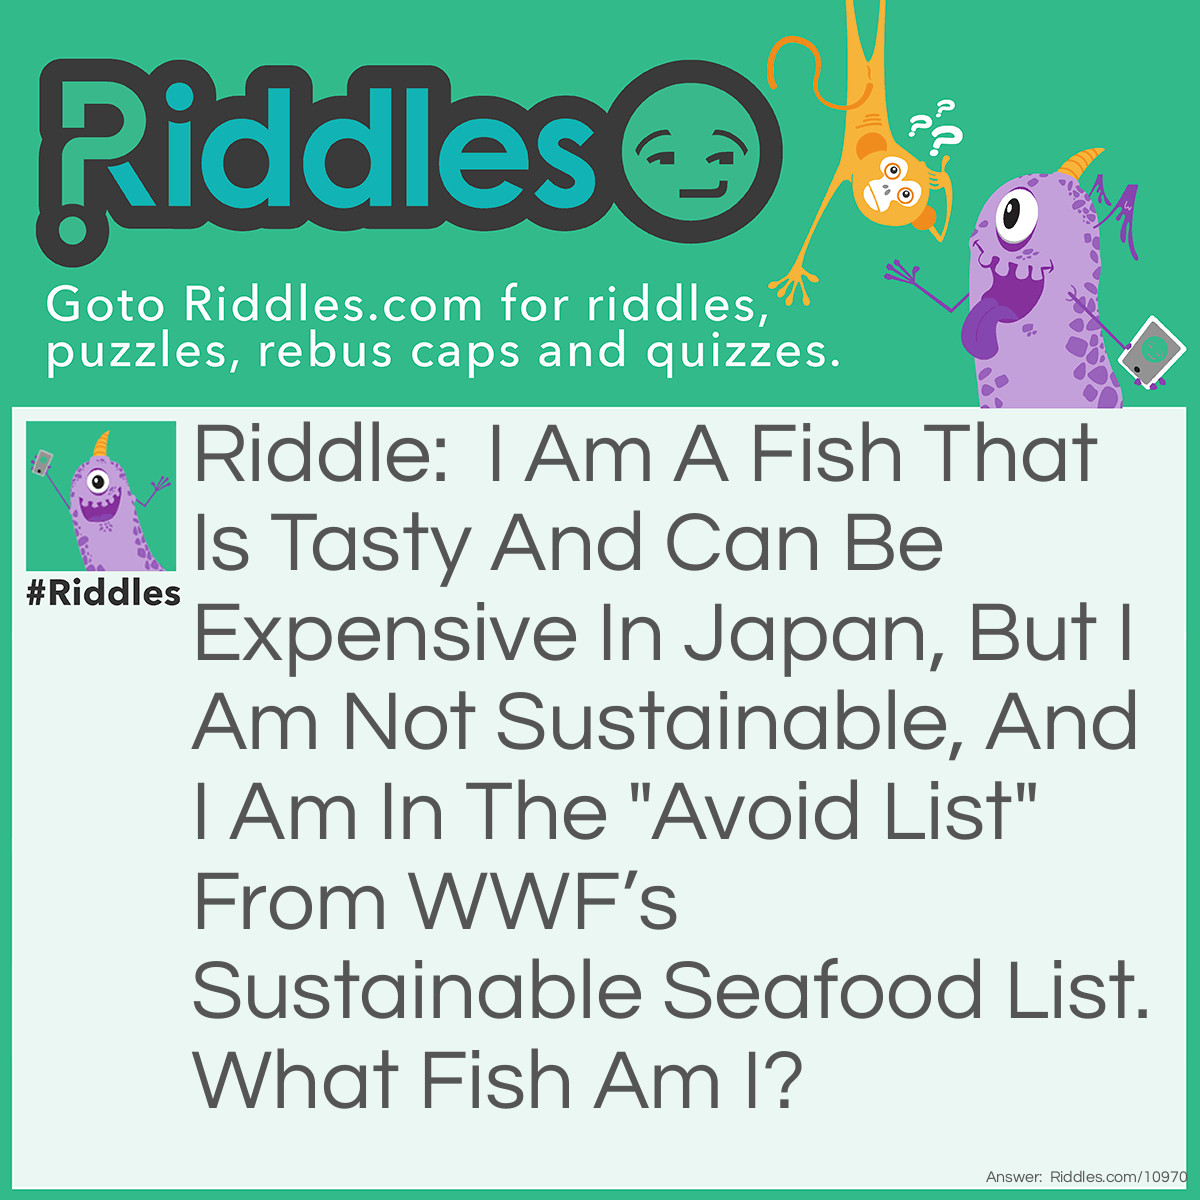 Riddle: I Am A Fish That Is Tasty And Can Be Expensive In Japan, But I Am Not Sustainable, And I Am In The "Avoid List" From WWF’s Sustainable Seafood List. What Fish Am I? Answer: An Eel.